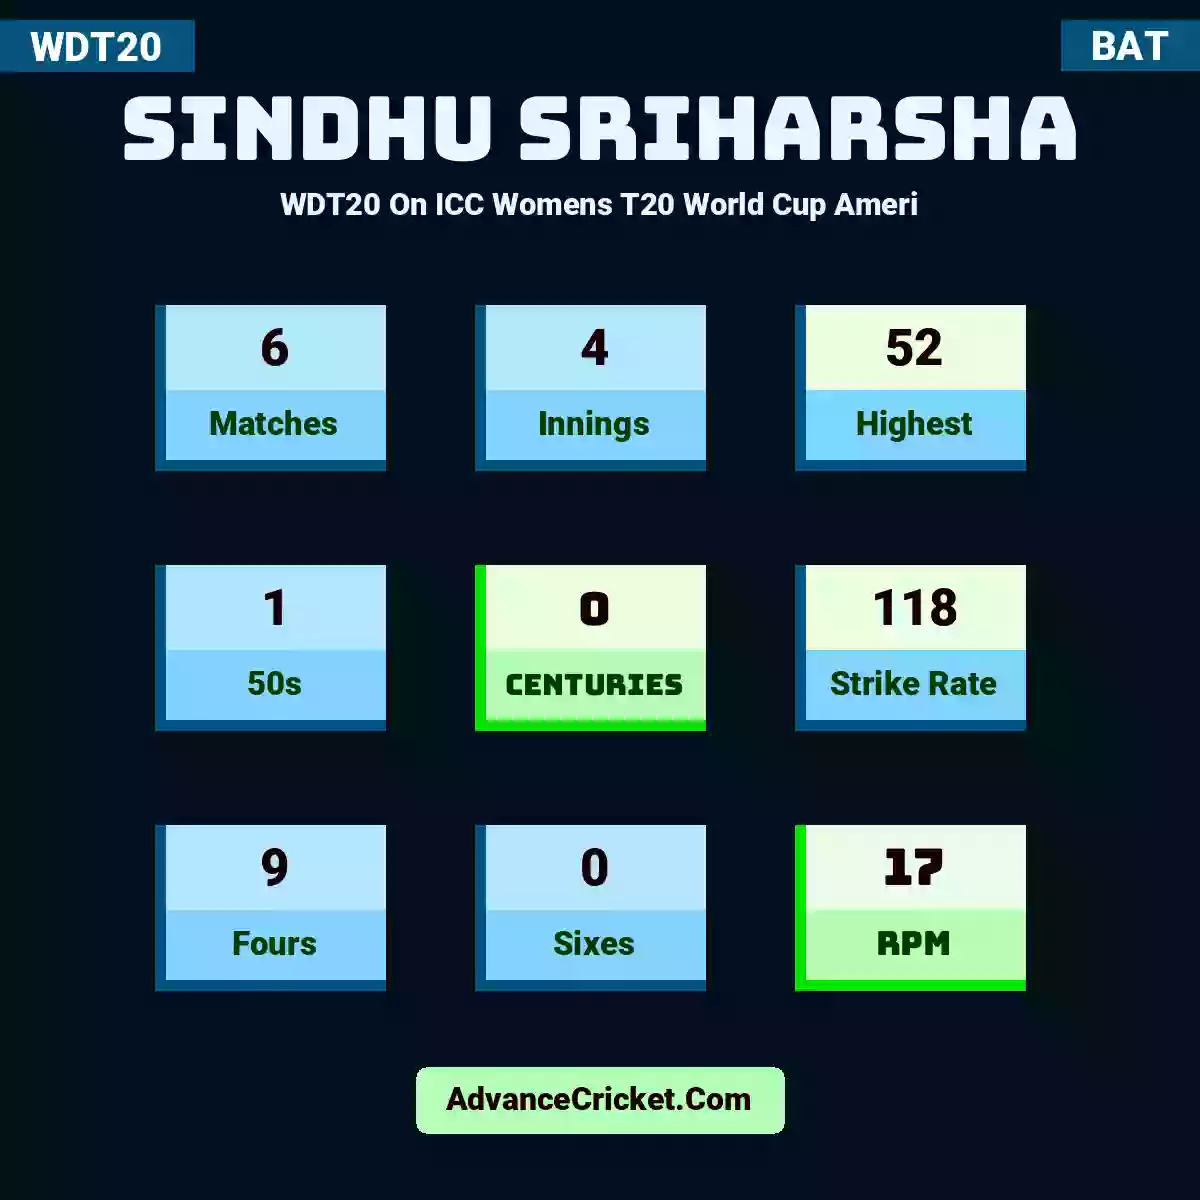 Sindhu Sriharsha WDT20  On ICC Womens T20 World Cup Ameri, Sindhu Sriharsha played 6 matches, scored 52 runs as highest, 1 half-centuries, and 0 centuries, with a strike rate of 118. S.Sriharsha hit 9 fours and 0 sixes, with an RPM of 17.